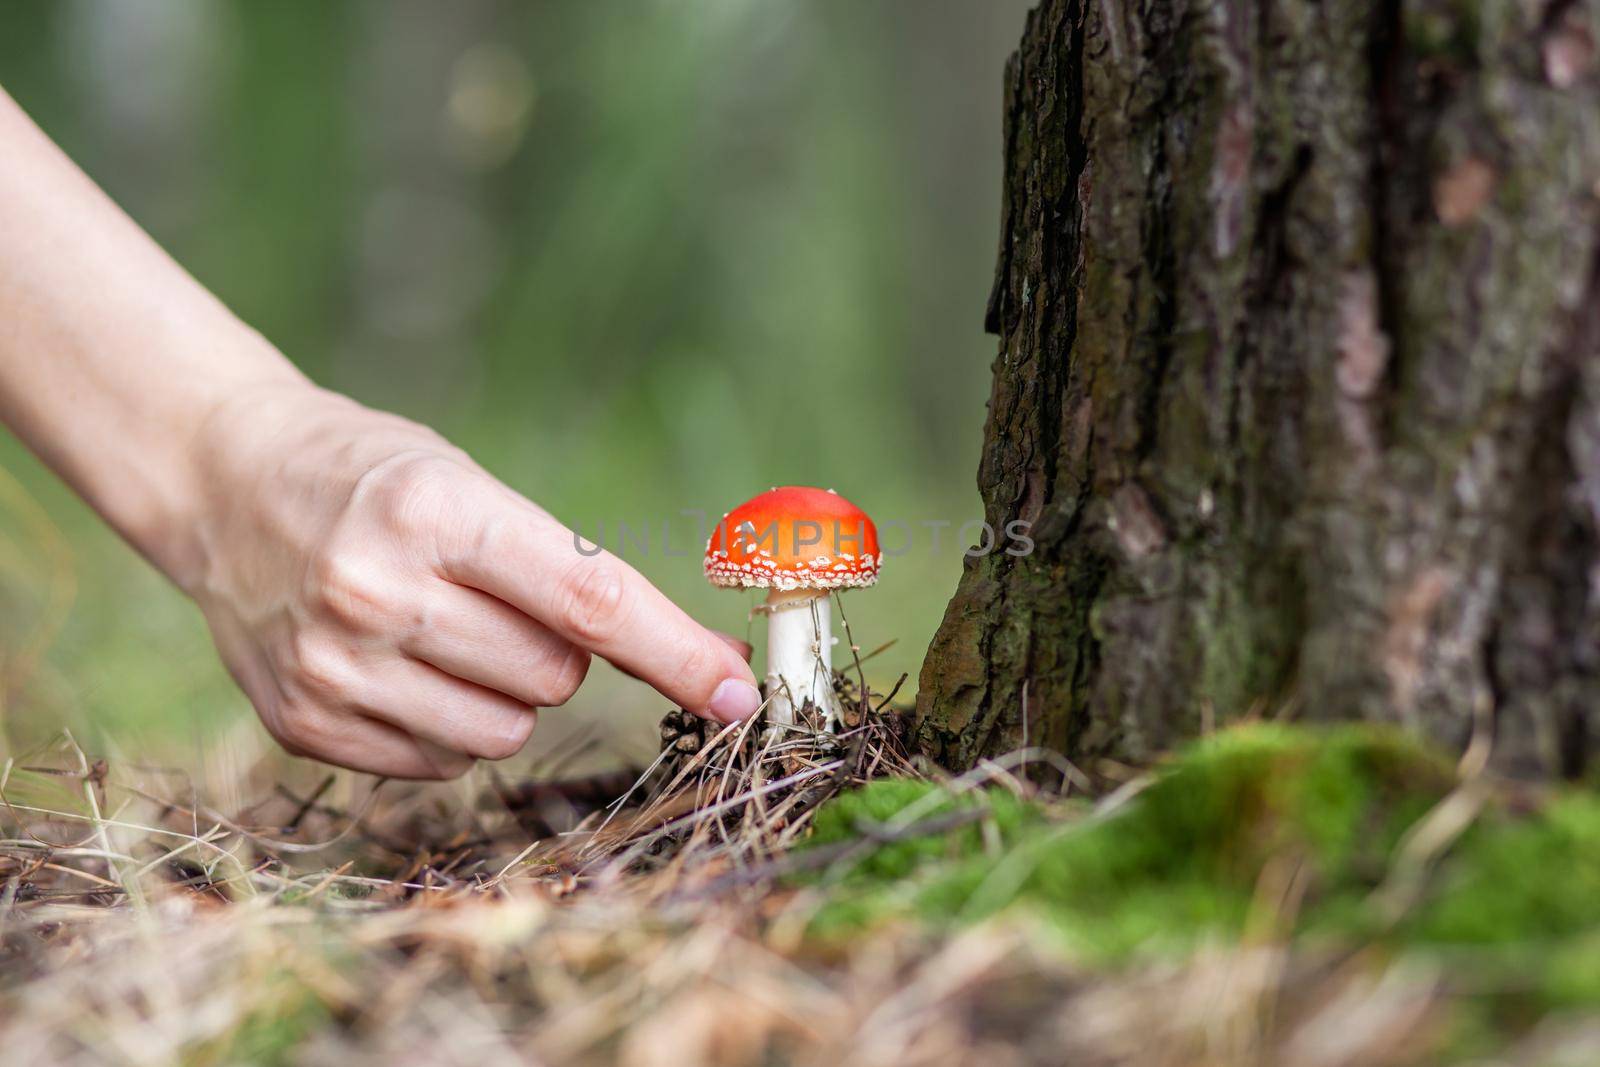 A woman reaches out with her hand to pick a mushroom fly agaric. An inedible mushroom is a red fly agaric near a tree. Forest poisonous mushroom red fly agaric. Beautiful a red mushroom close-up.